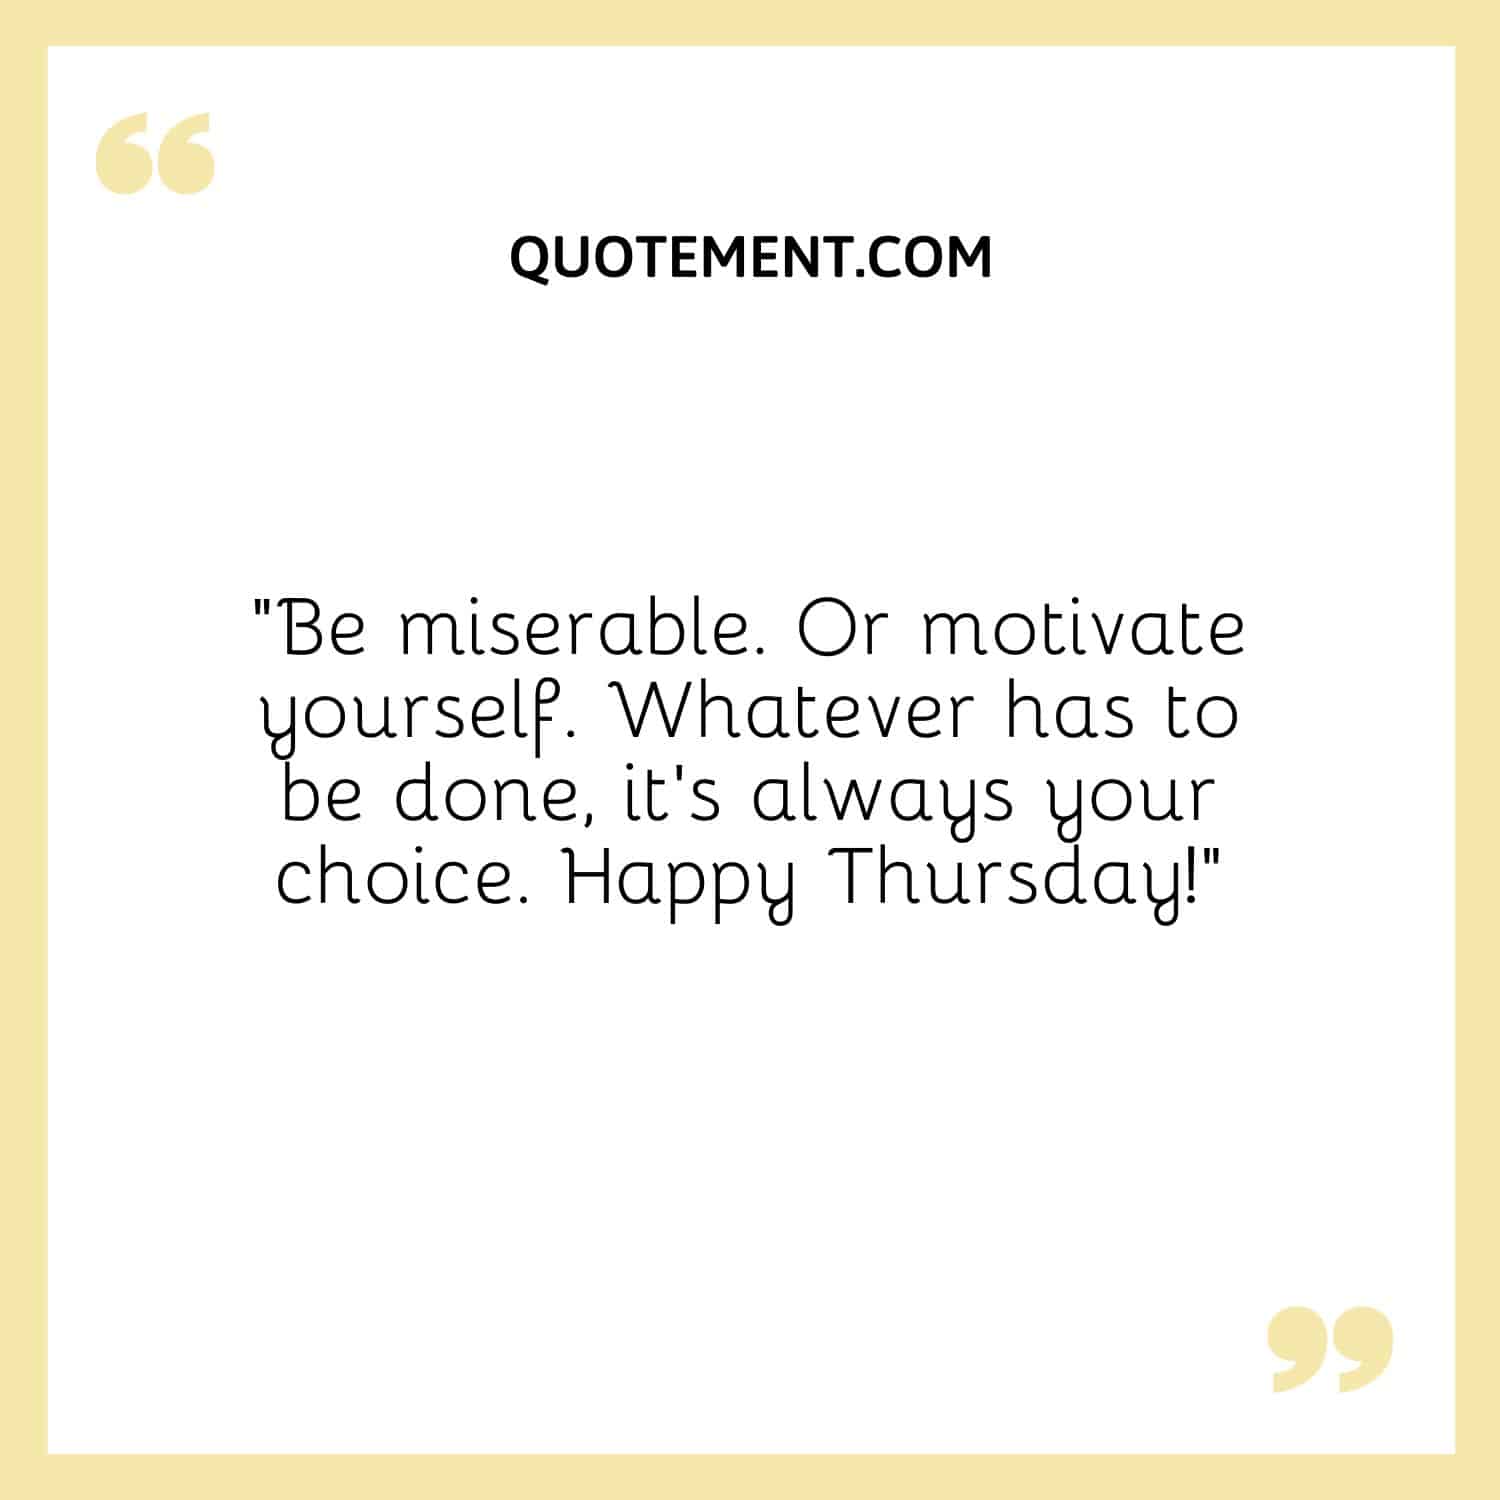 “Be miserable. Or motivate yourself. Whatever has to be done, it’s always your choice. Happy Thursday!”